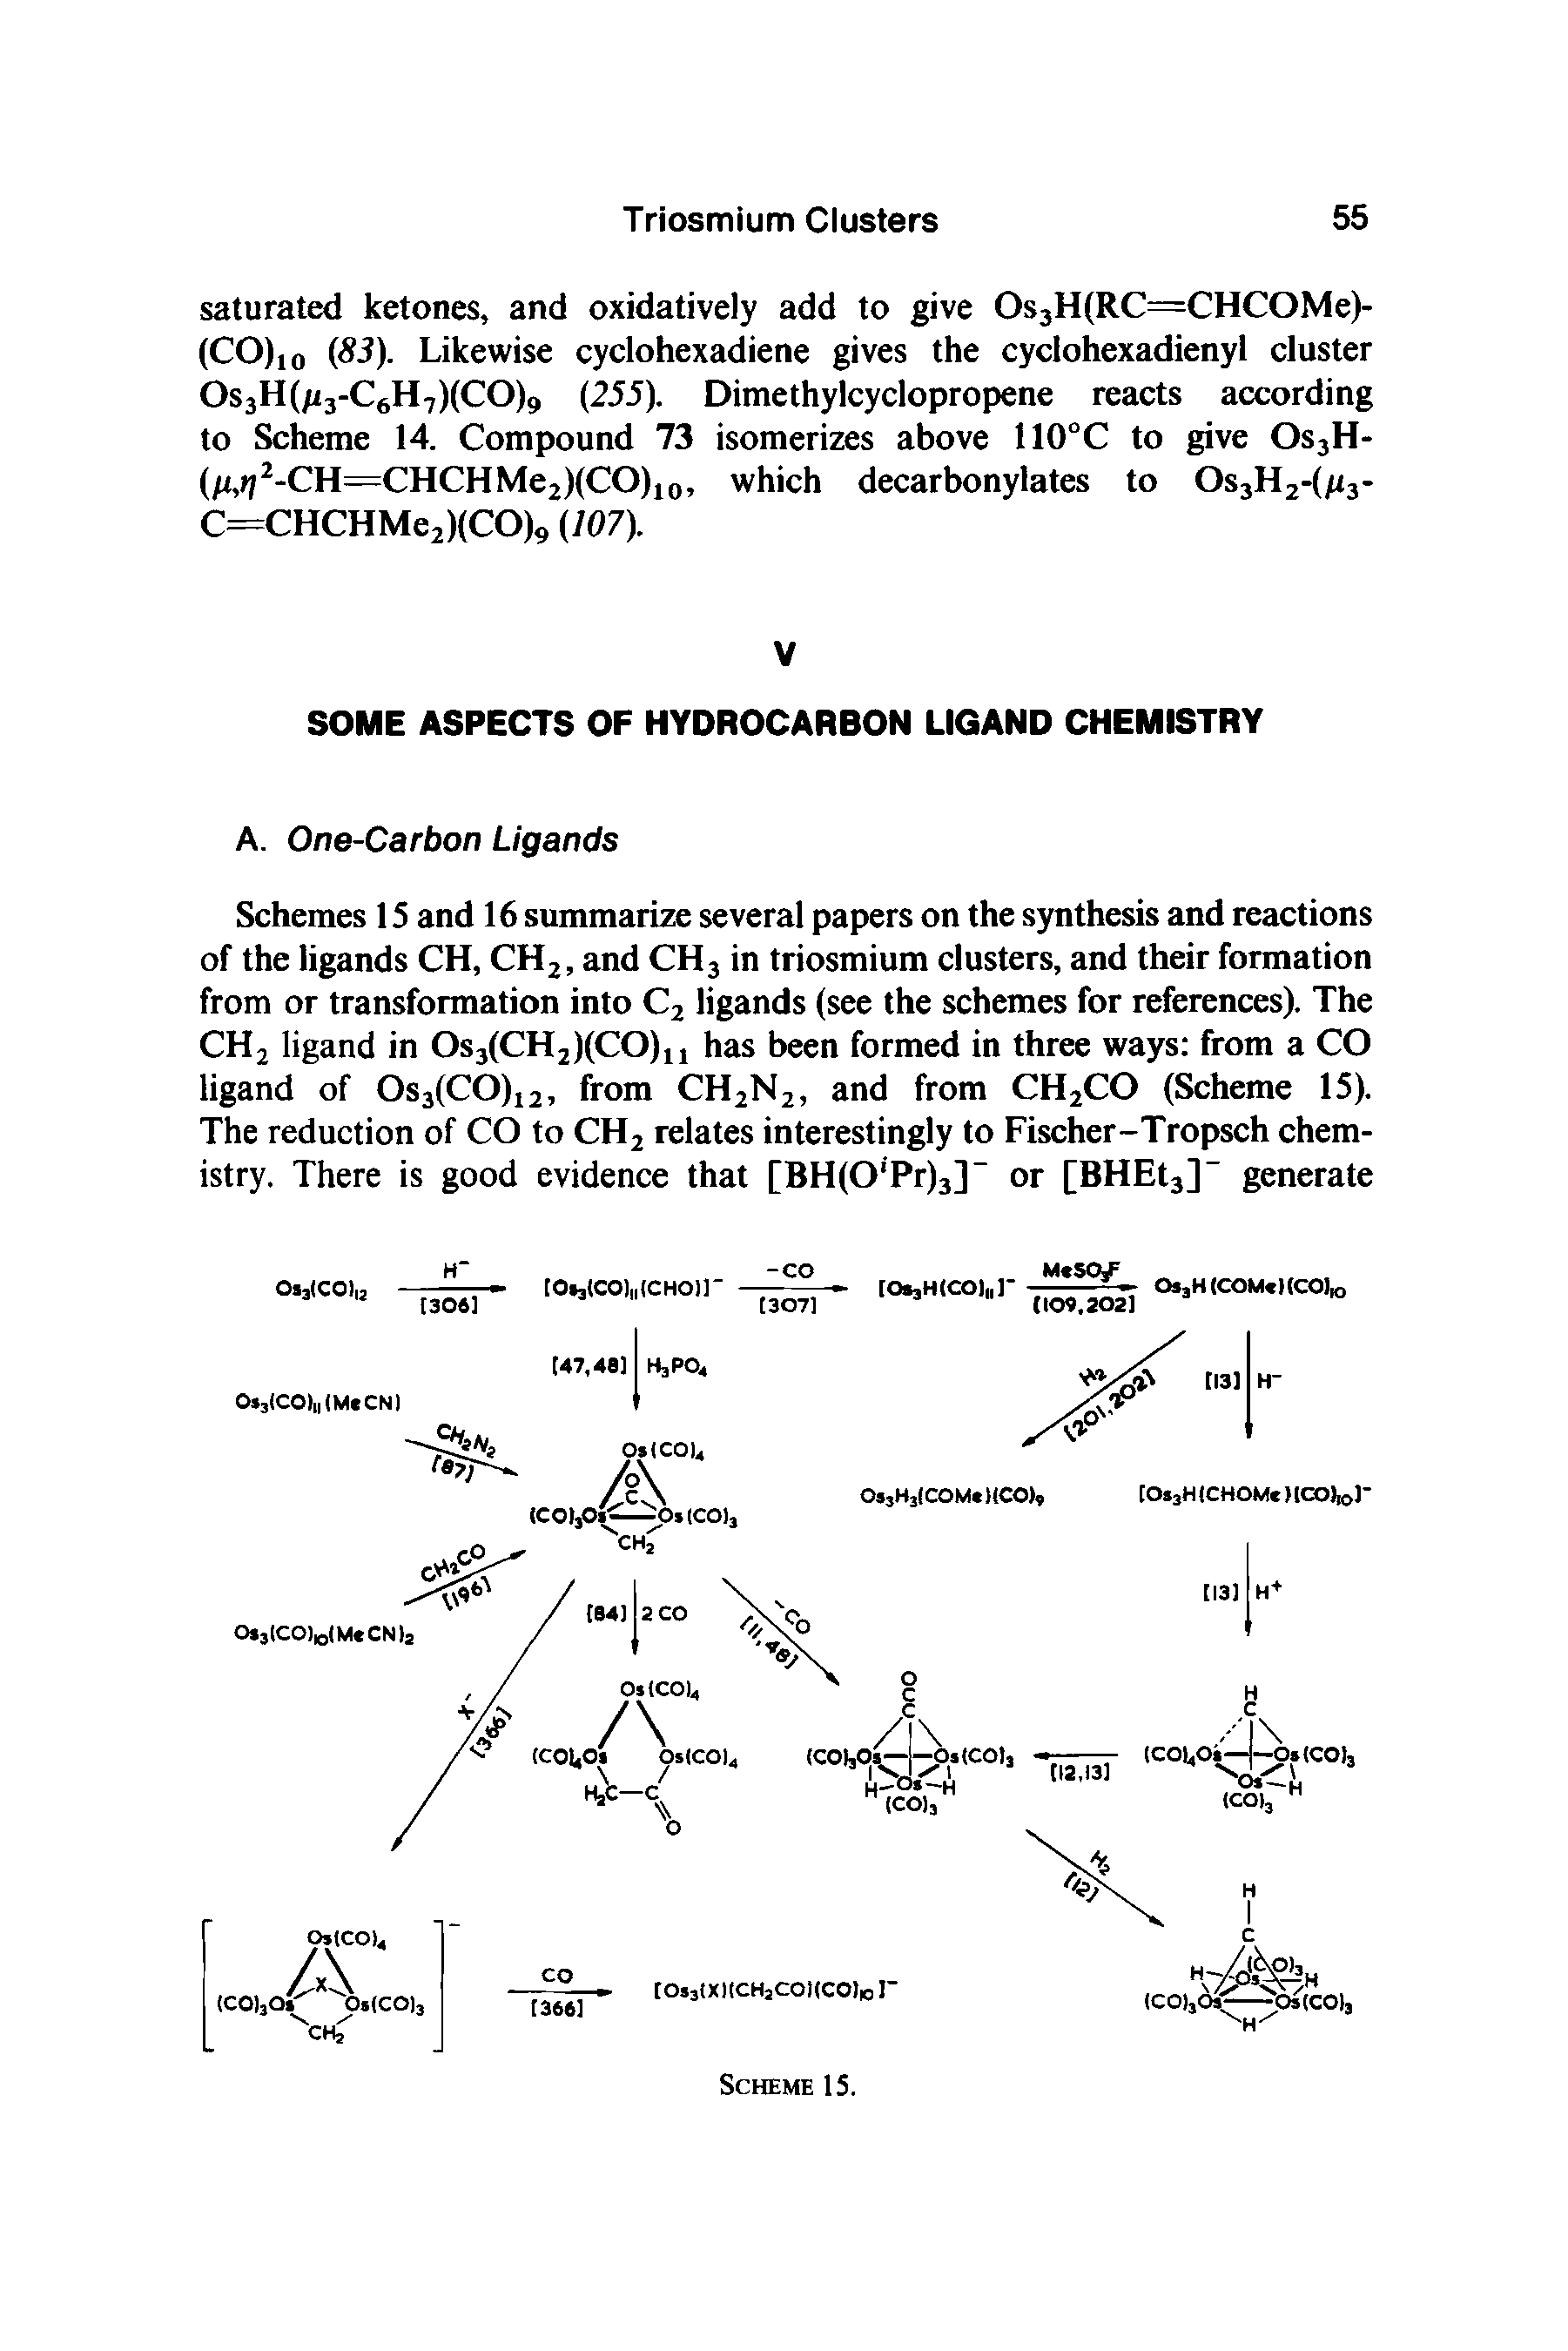 Schemes 15 and 16 summarize several papers on the synthesis and reactions of the ligands CH, CH2, and CH3 in triosmium clusters, and their formation from or transformation into C2 ligands (see the schemes for references). The CH2 ligand in Os3(CH2)(CO)u has been formed in three ways from a CO ligand of Os3(CO)12, from CH2N2, and from CH2CO (Scheme 15). The reduction of CO to CH2 relates interestingly to Fischer-Tropsch chemistry. There is good evidence that [BH(0 Pr)3] or [BHEt3] generate...